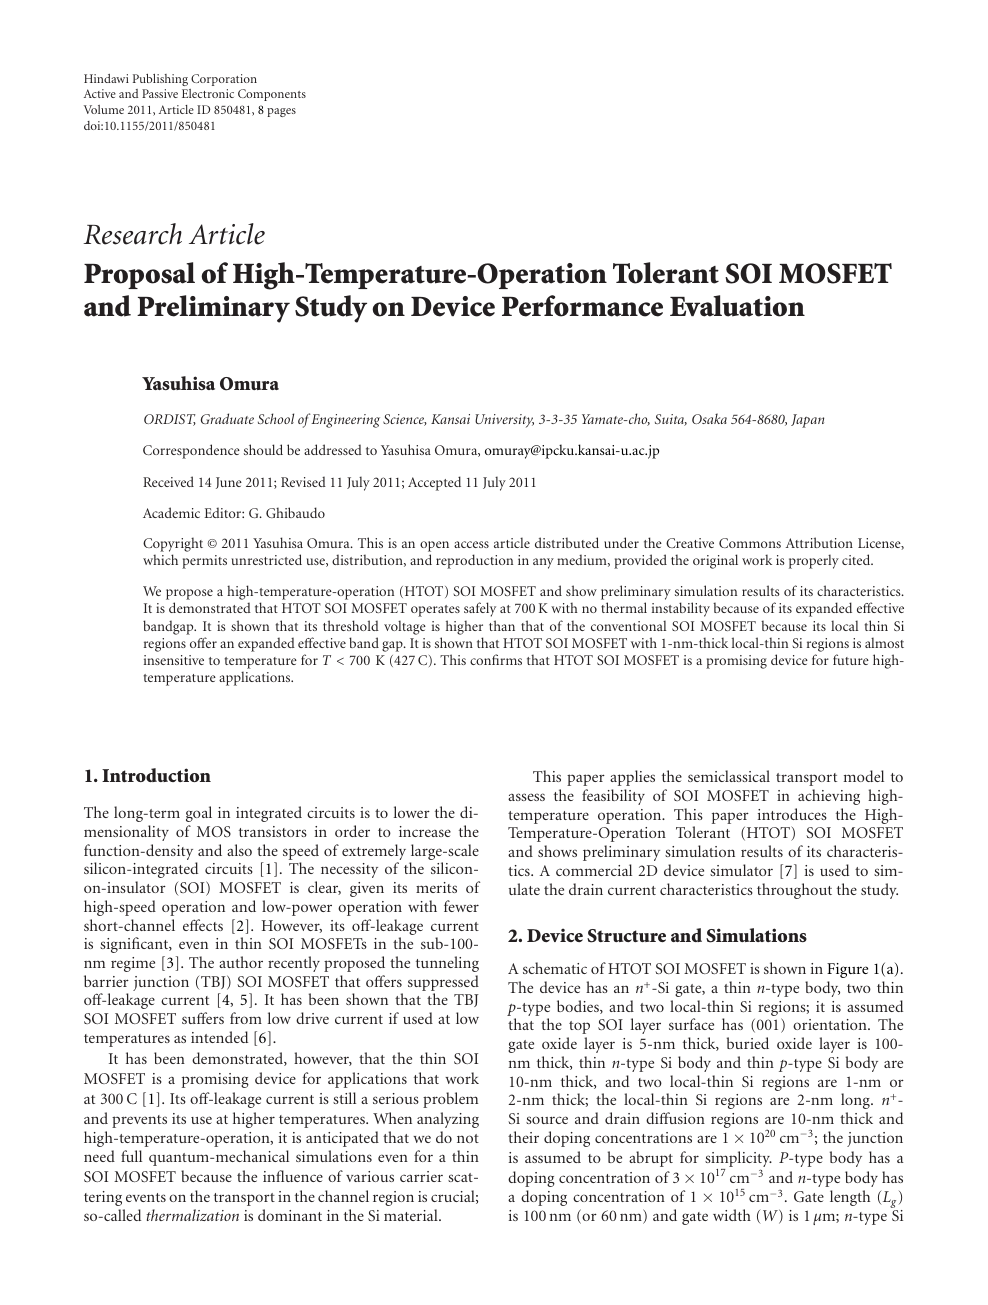 Proposal Of High Temperature Operation Tolerant Soi Mosfet And Preliminary Study On Device Performance Evaluation Topic Of Research Paper In Nano Technology Download Scholarly Article Pdf And Read For Free On Cyberleninka Open Science